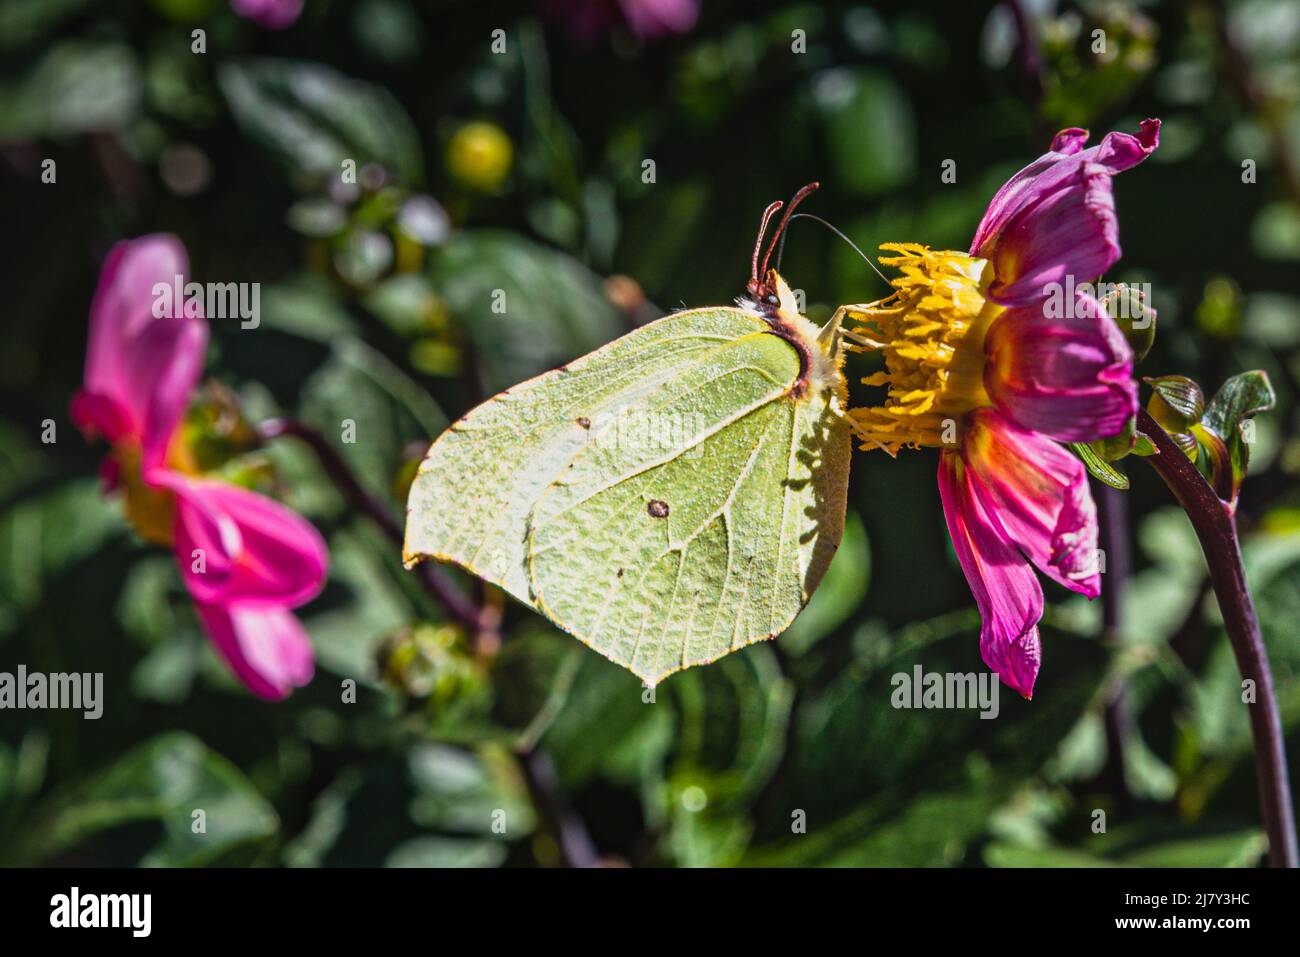 Gonepteryx rhamni (Pieridae) Brimstones butterfly. Yellow butterfly collecting nectar from a pink flower shows the role insects play in pollination Stock Photo